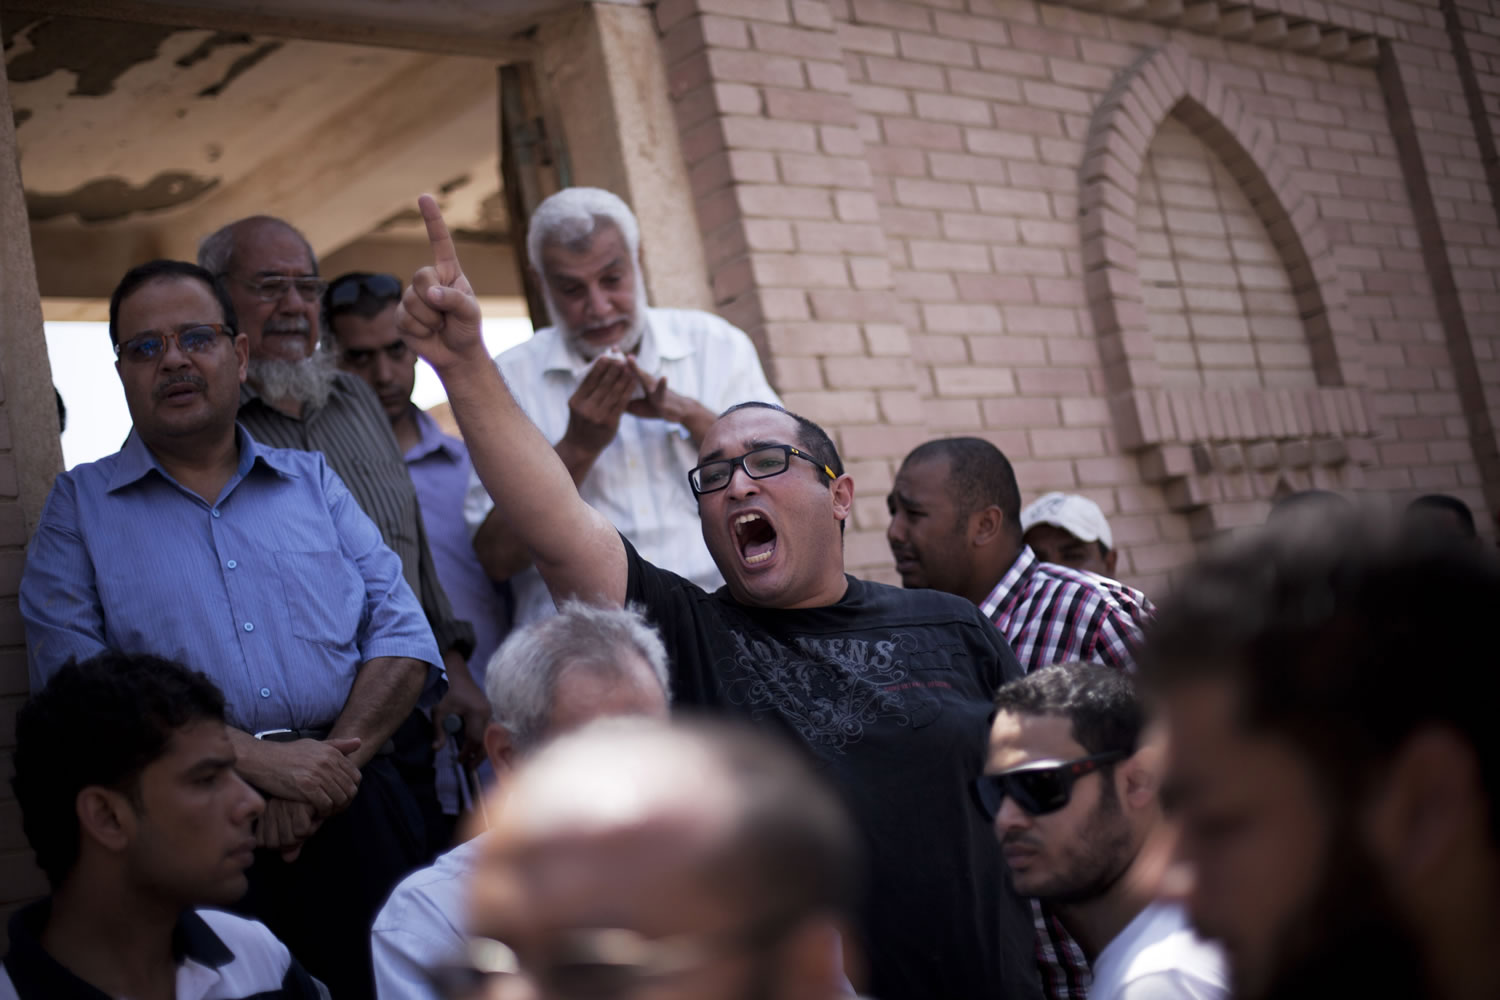 A friend of Ammar Badie, 38, who was killed Friday by Egyptian security forces during clashes in Ramses Square, shouts, &quot;Allah is the greatest,&quot; while attending Badie's burial Sunday in Cairo's Katameya district.